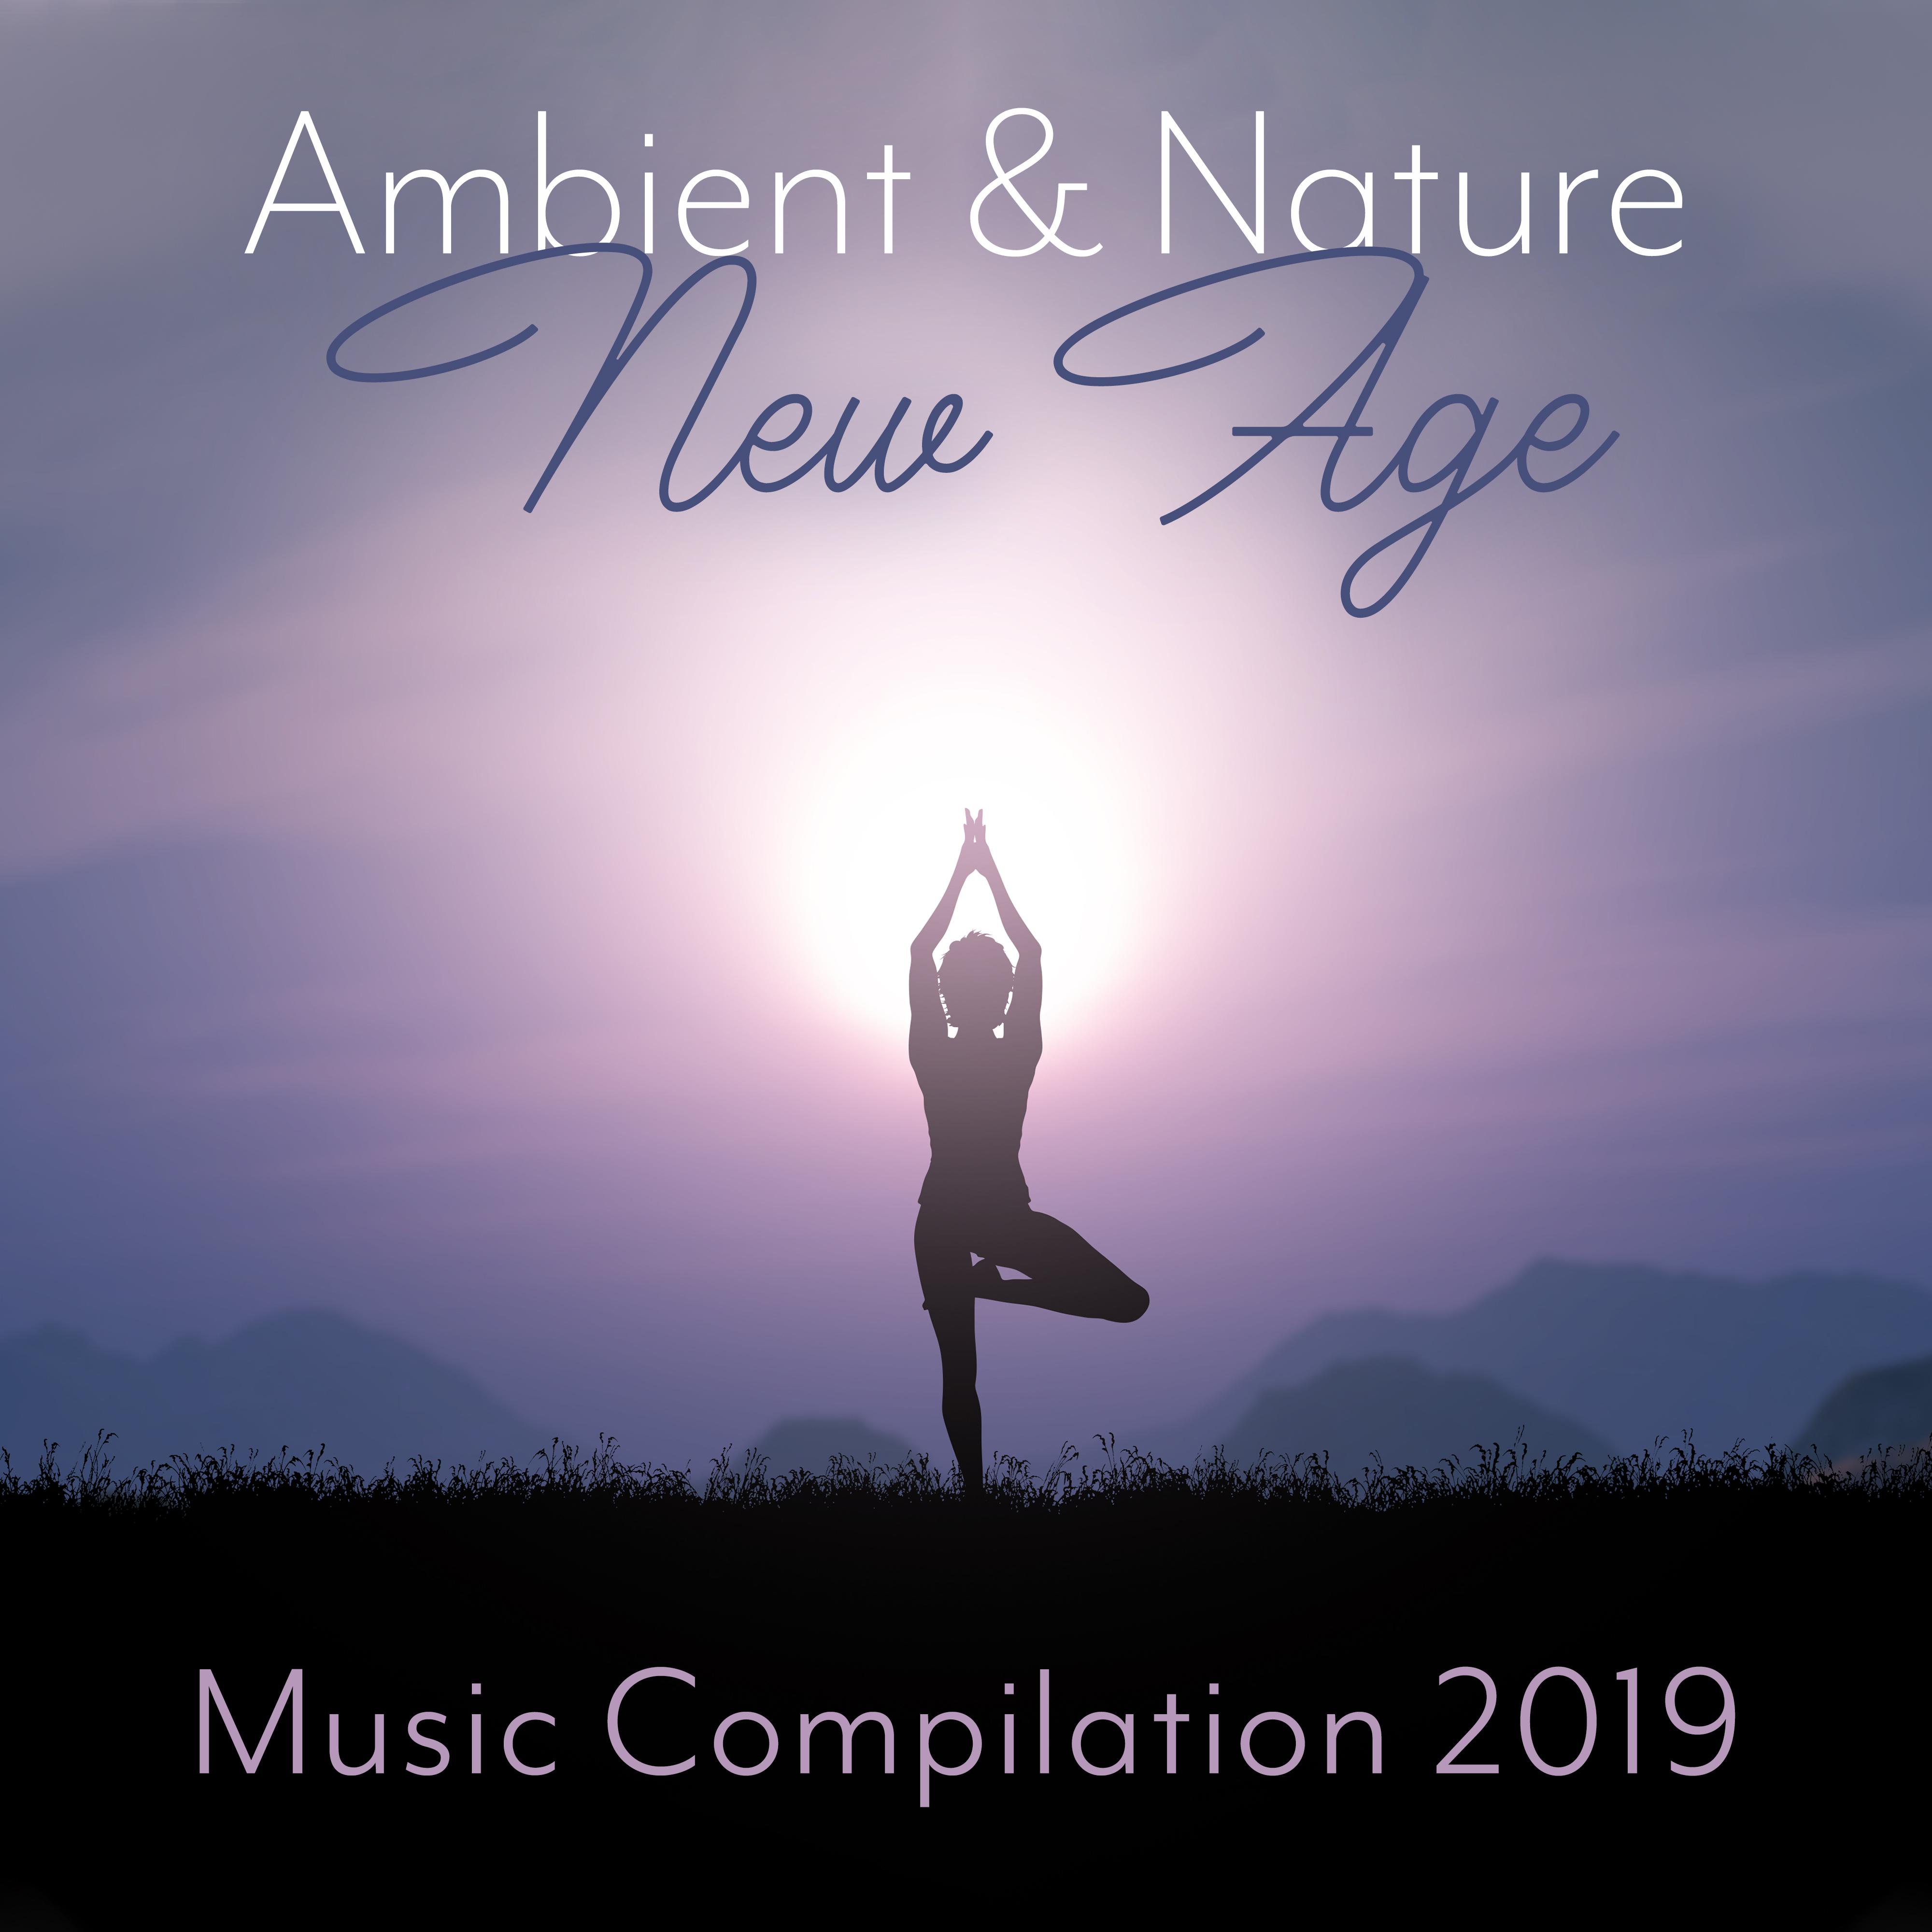 Ambient & Nature New Age Music Compilation 2019